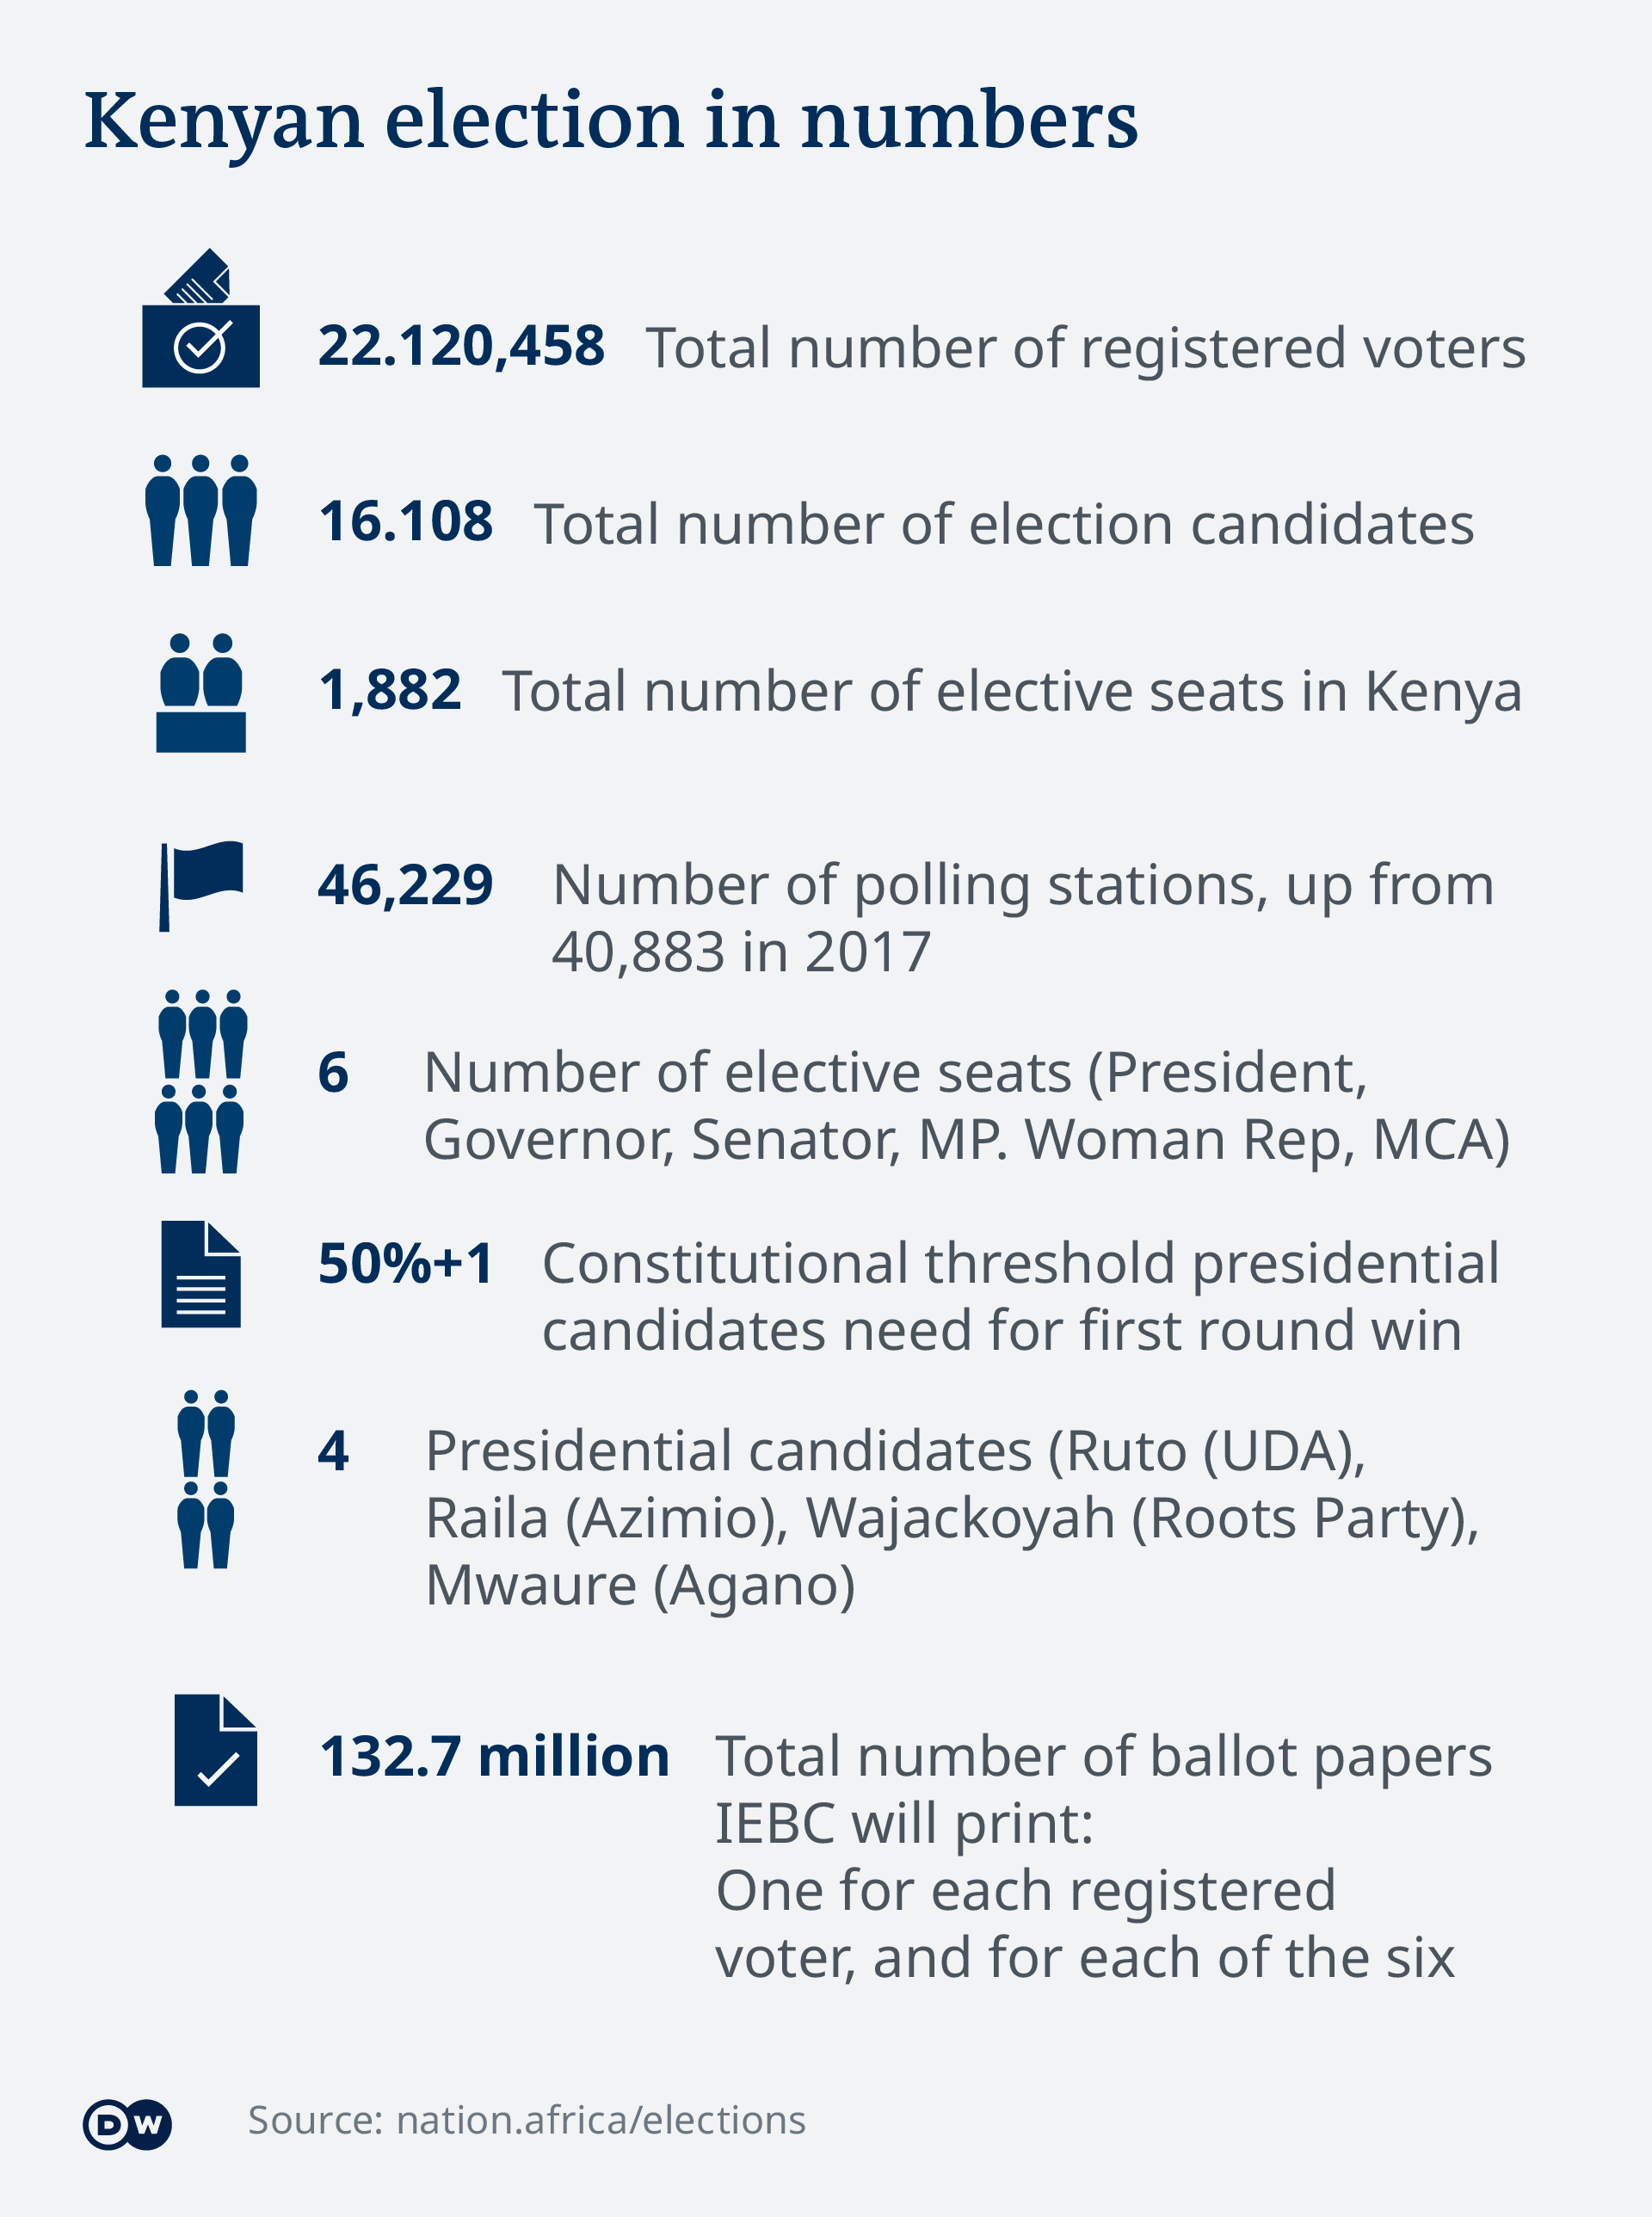 An infographic showing the rules and numbers of the Kenyan elections